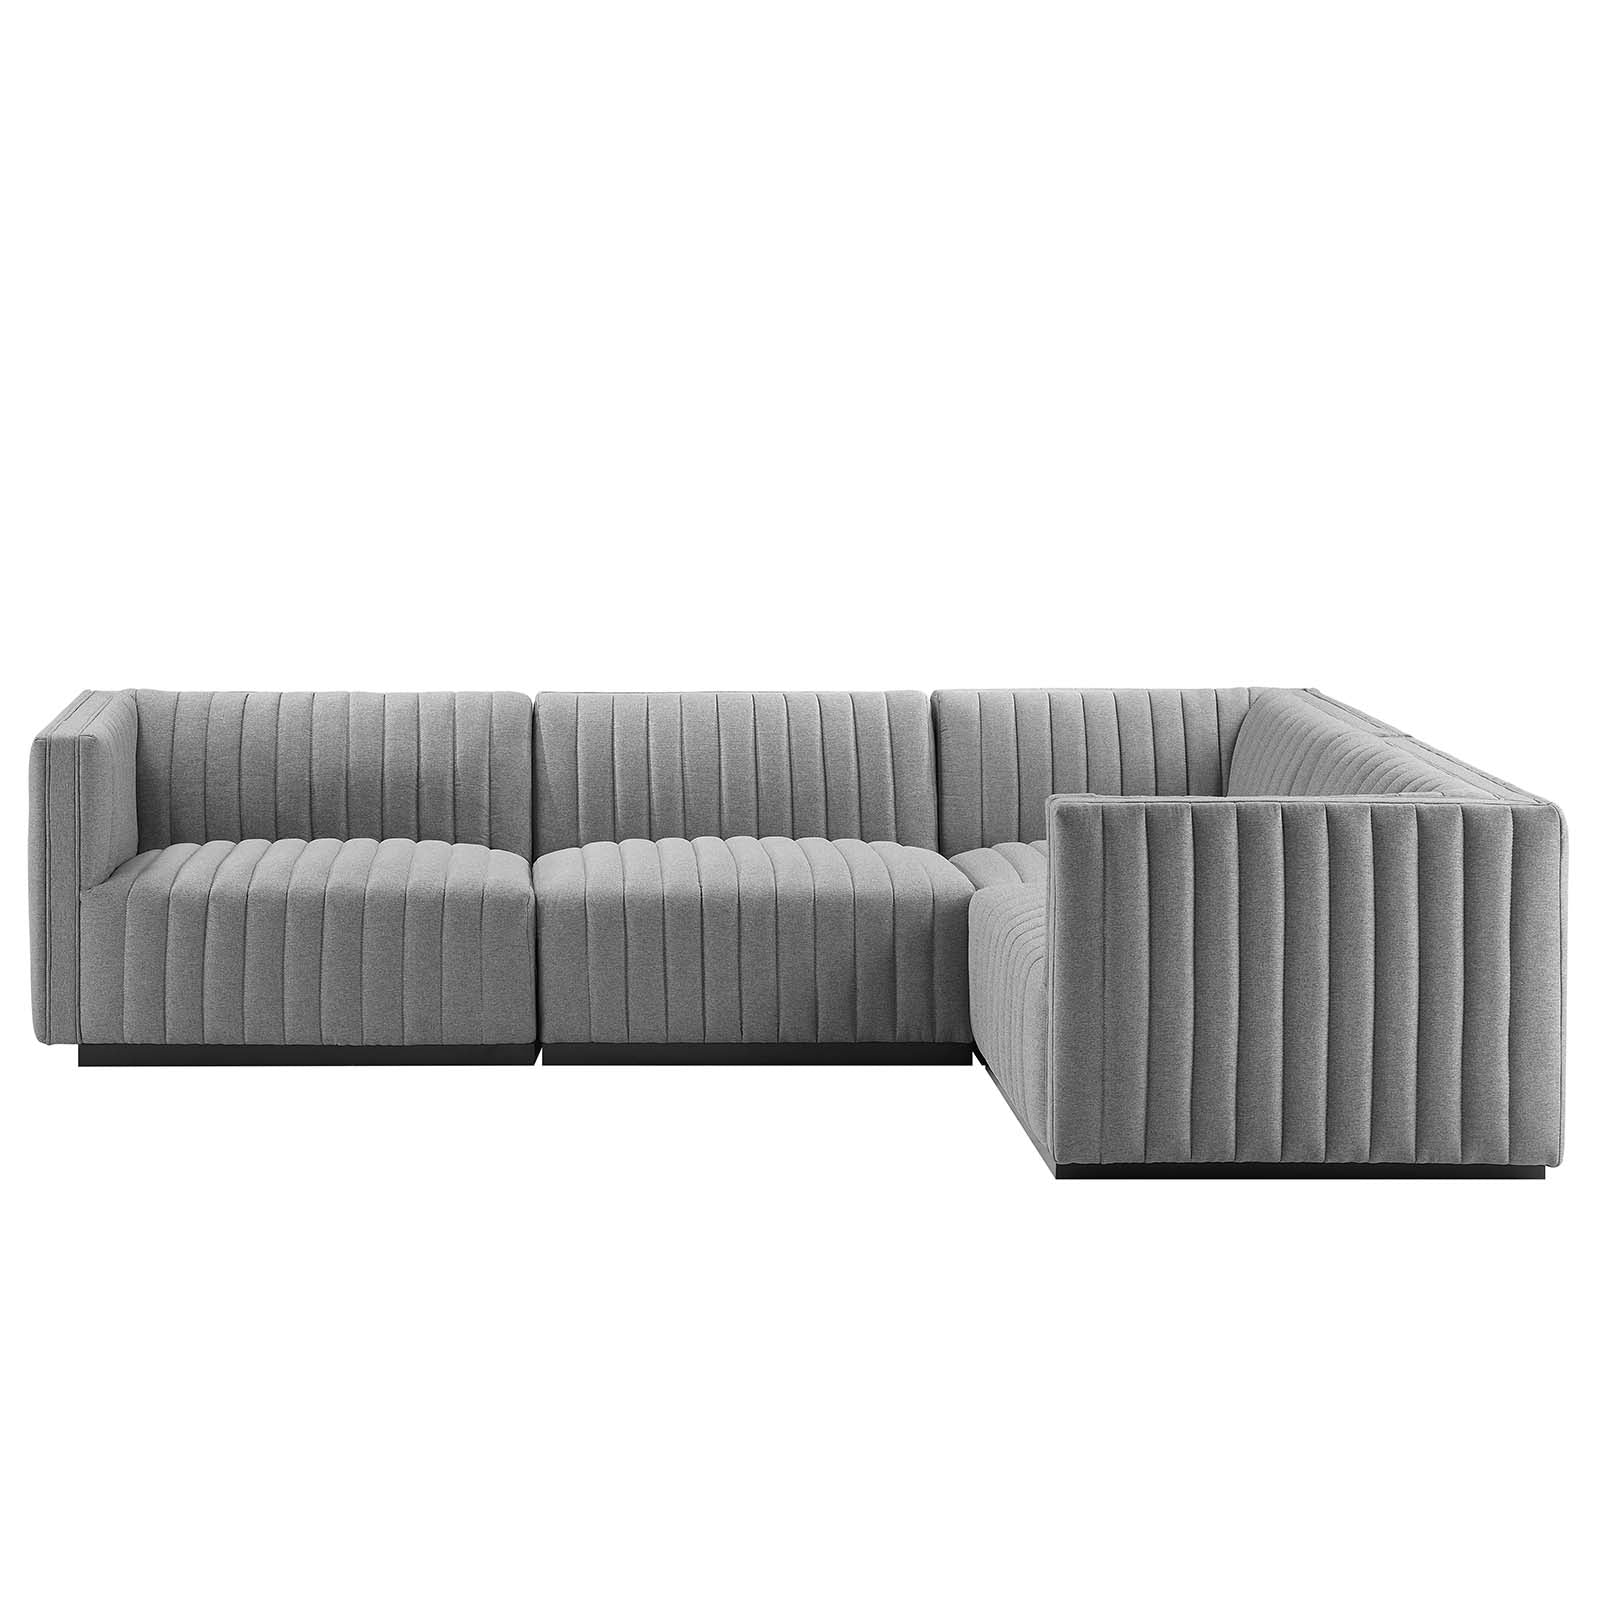 Modway Sectional Sofas - Conjure Channel Tufted Upholstered Fabric 4-Piece L-Shaped Sectional Black Light Gray